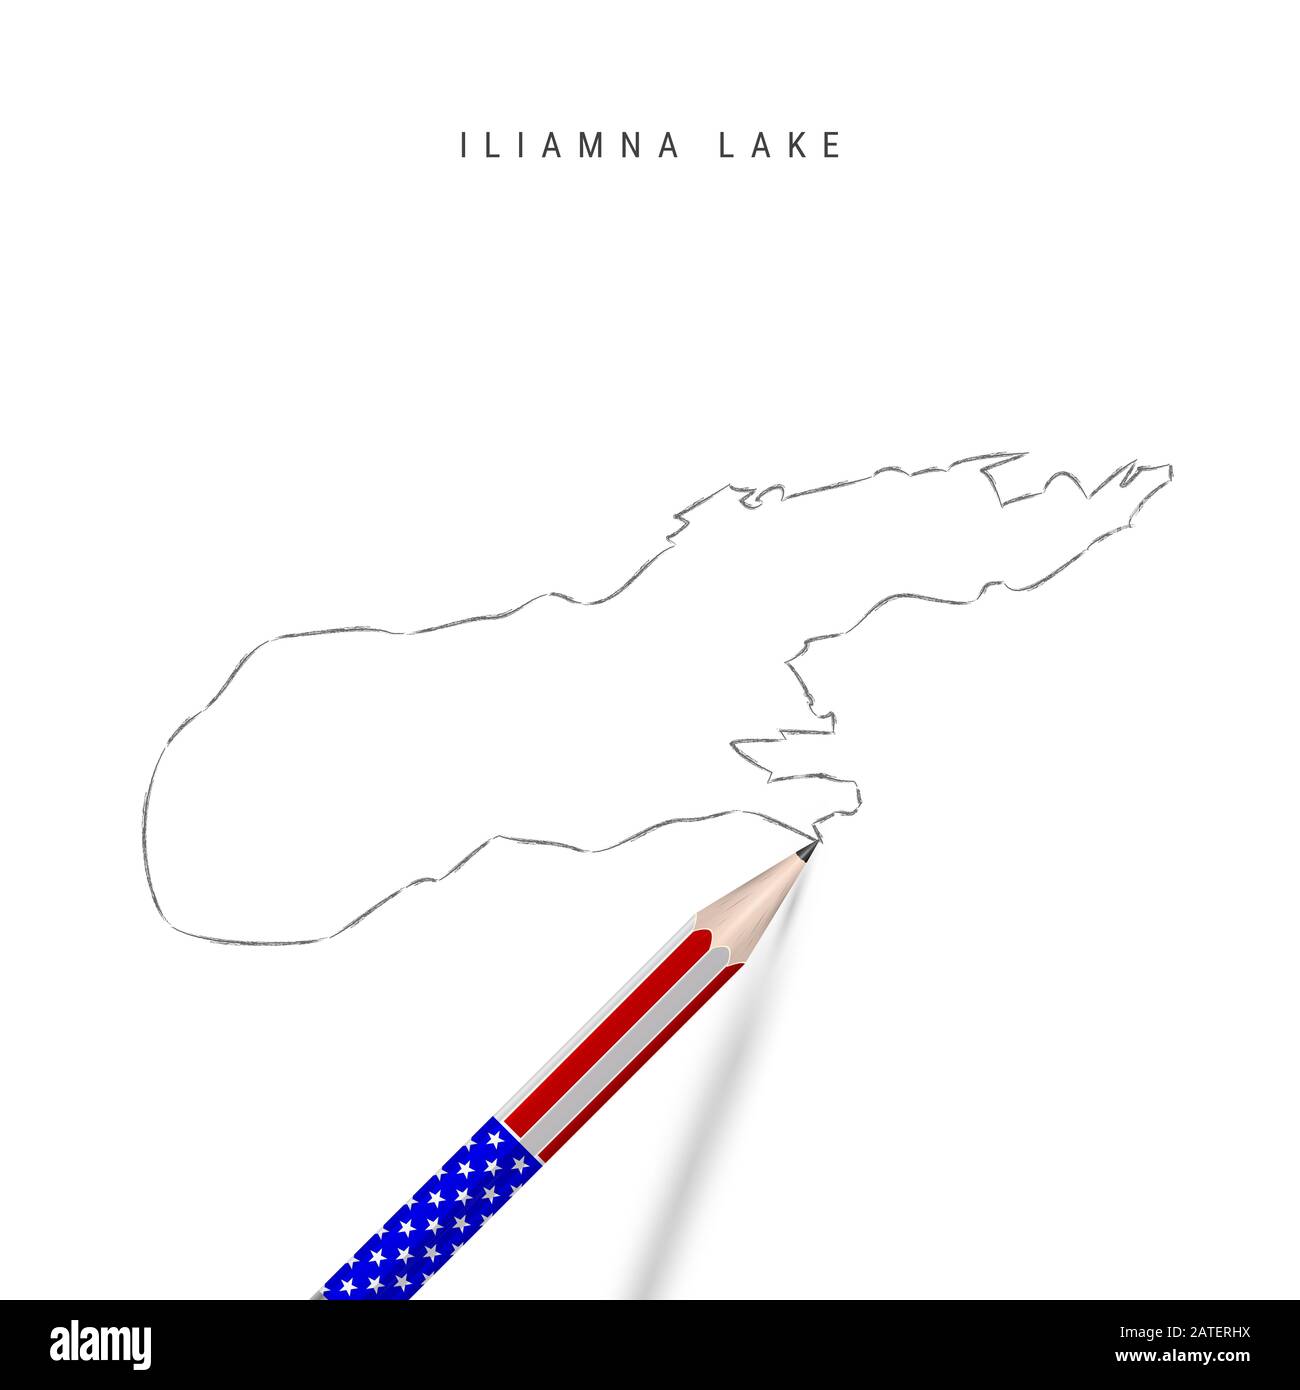 Iliamna Lake map pencil sketch. Iliamna Lake outline contour map with 3D pencil in american flag colors. Freehand drawing , hand drawn sketch isolated Stock Photo